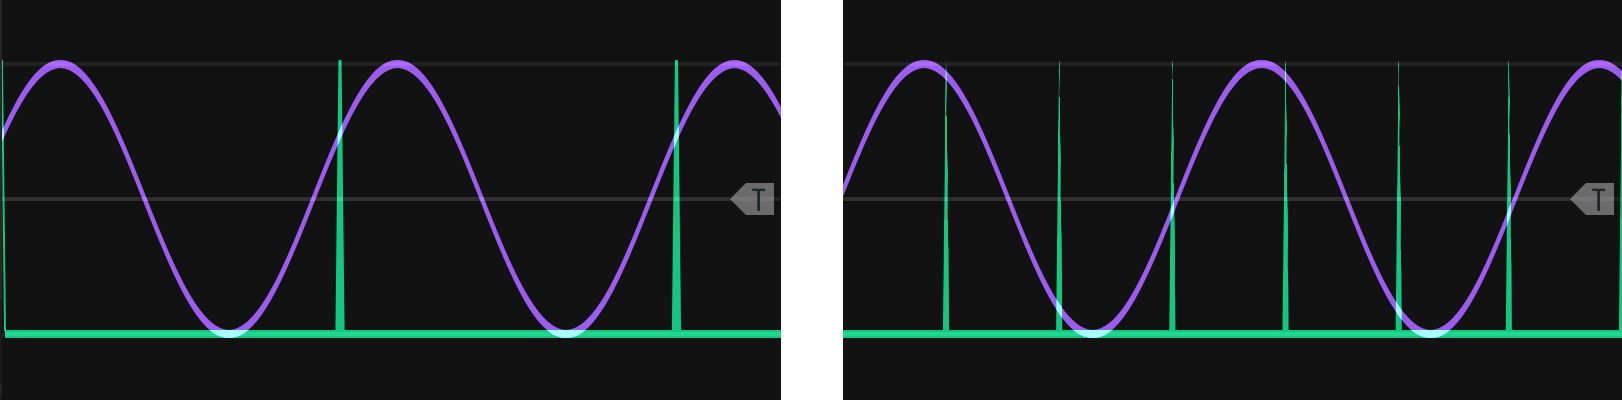 A sine wave LFO (purple) being sampled (green) so the sampled values can be input to a quantizer to create an arpeggio. If the sampling rate matches the LFO frequency, only one repeating note will be sampled (left). The sampling rate must be higher than the LFO rate (right) to increase the number of notes. See text for additional factors that effect what voltages are sampled.